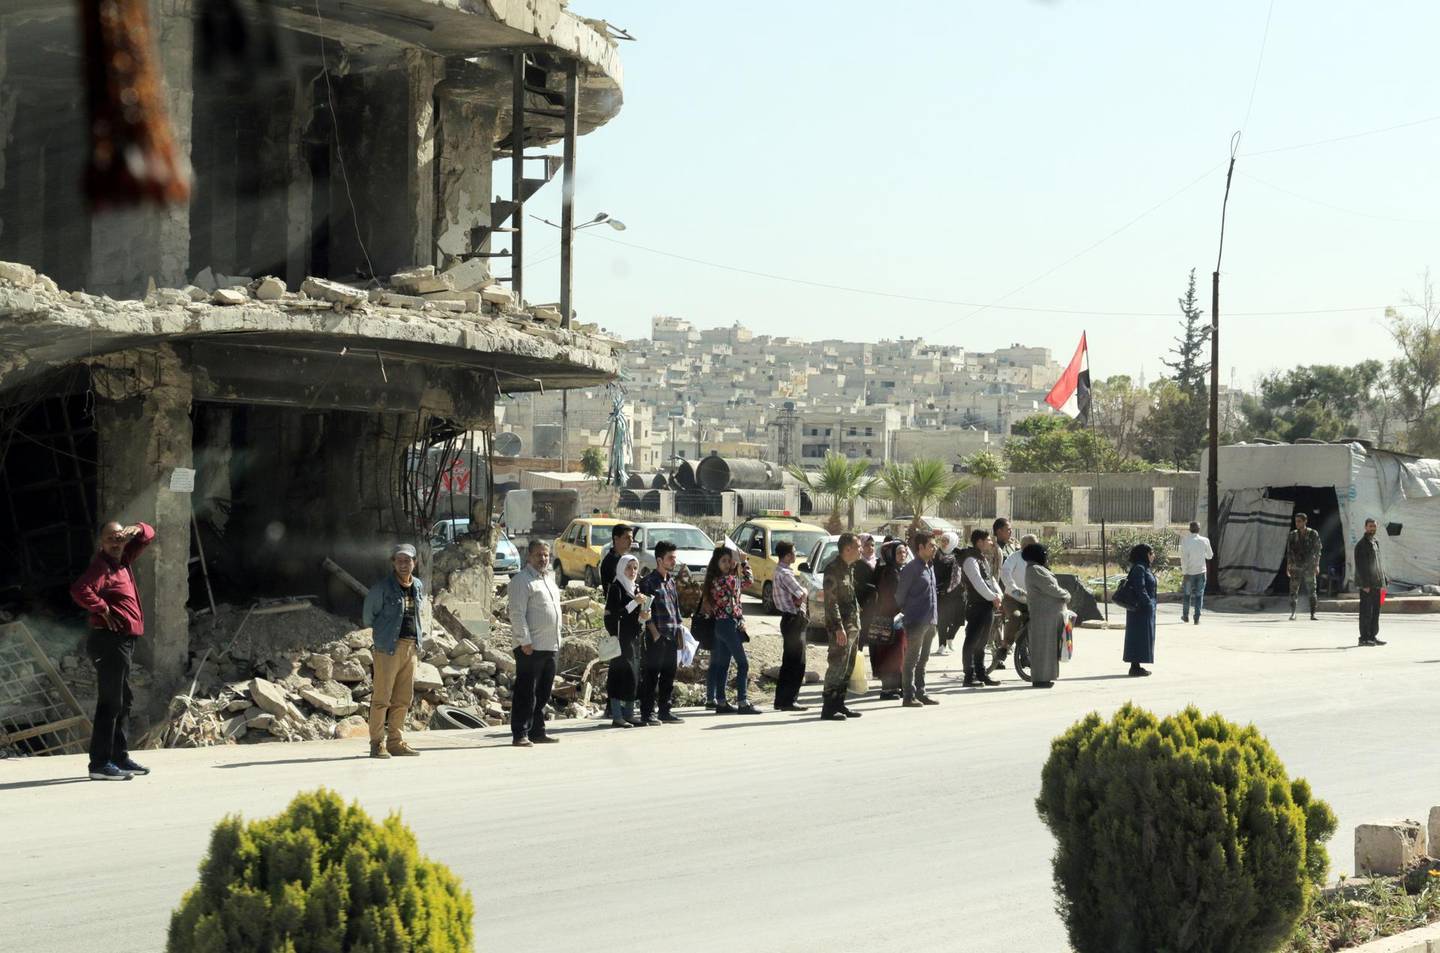 epa06677865 A picture taken through the window of a bus shows people standing in front of a destroyed building, in an unspecified town in Aleppo province, northern Syria, 18 April 2018. The previous day, folklore shows and traditional songs were performed in the Citadel Theater of besieged city of Aleppo to mark Syria's Independence Day.  EPA/YOUSSEF BADAWI